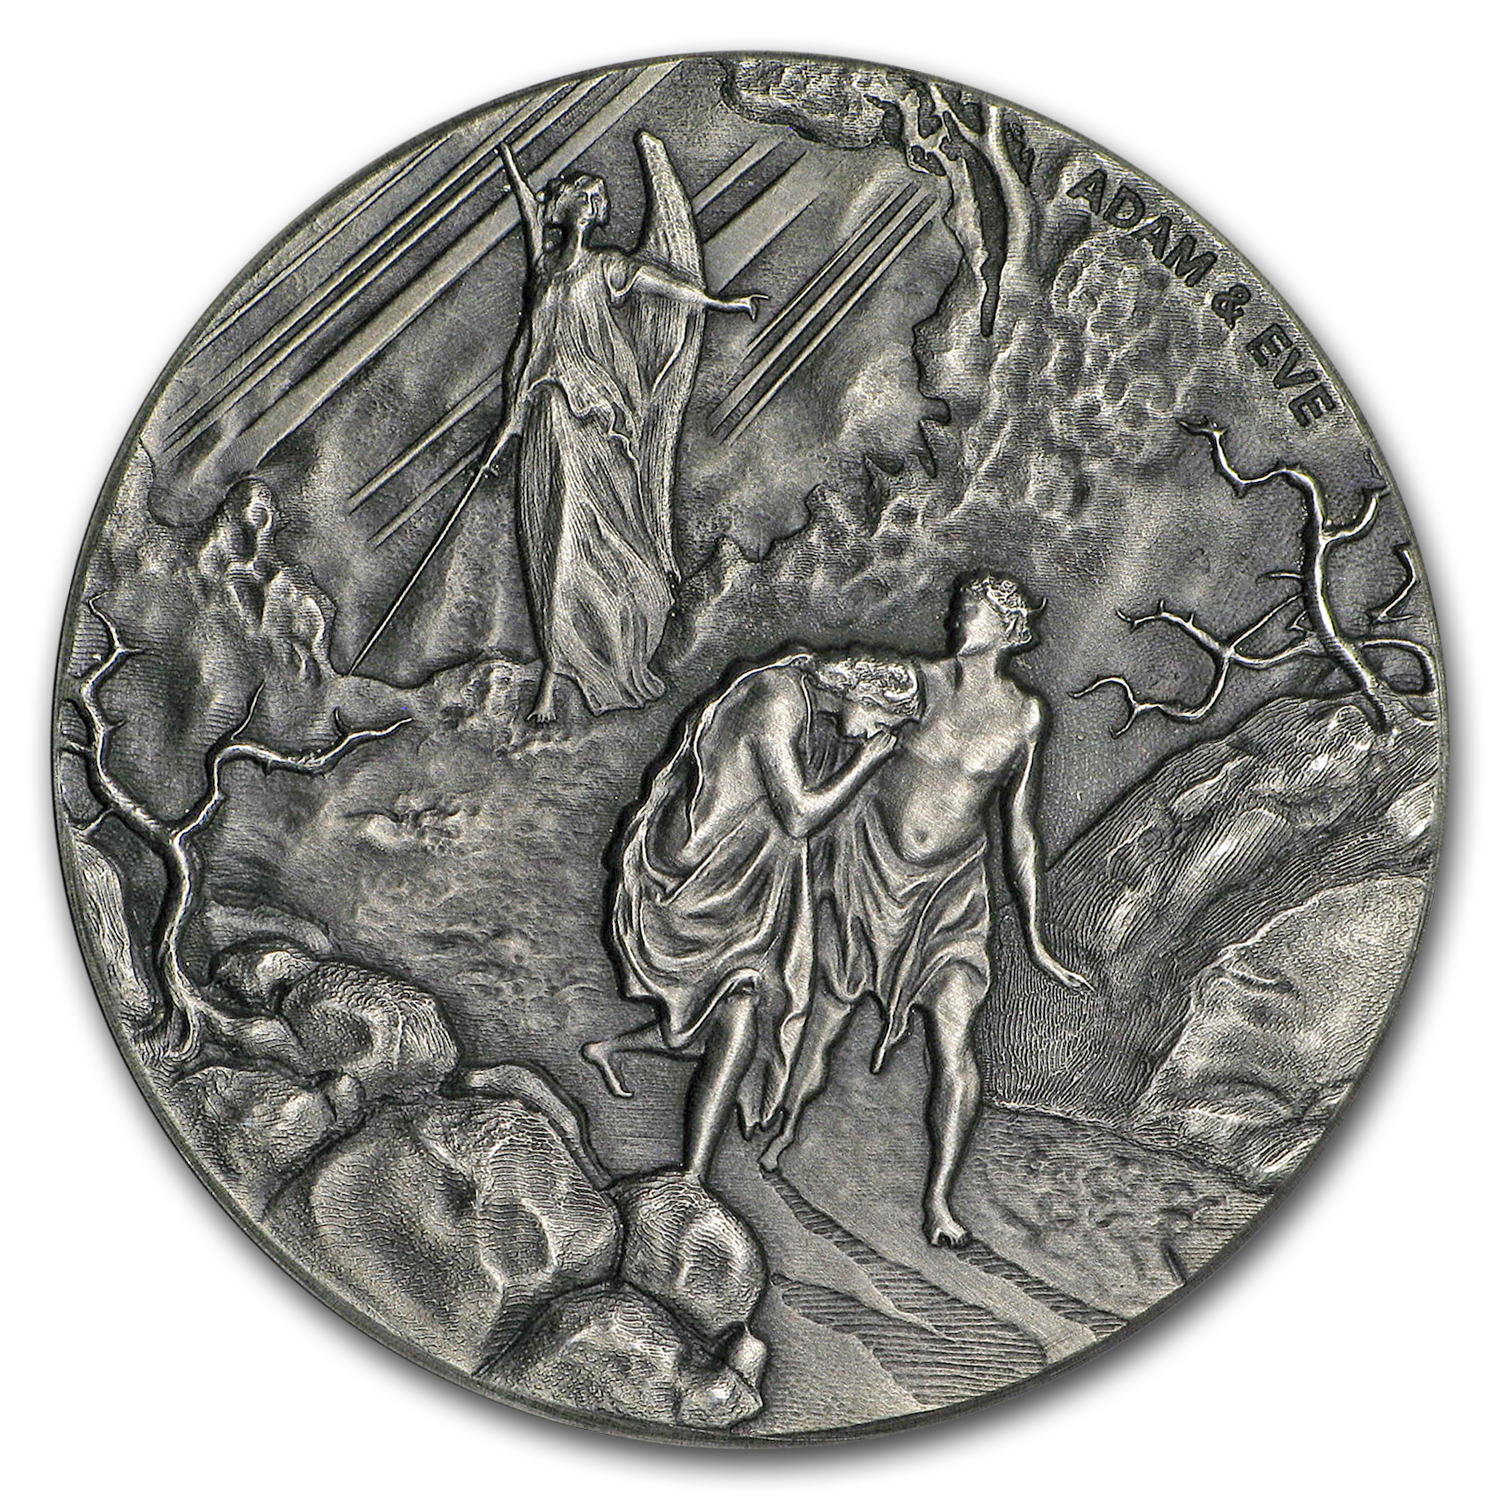 Buy 2016 2 oz Silver Coin - Biblical Series Adam and Eve (Coin Only) - Click Image to Close